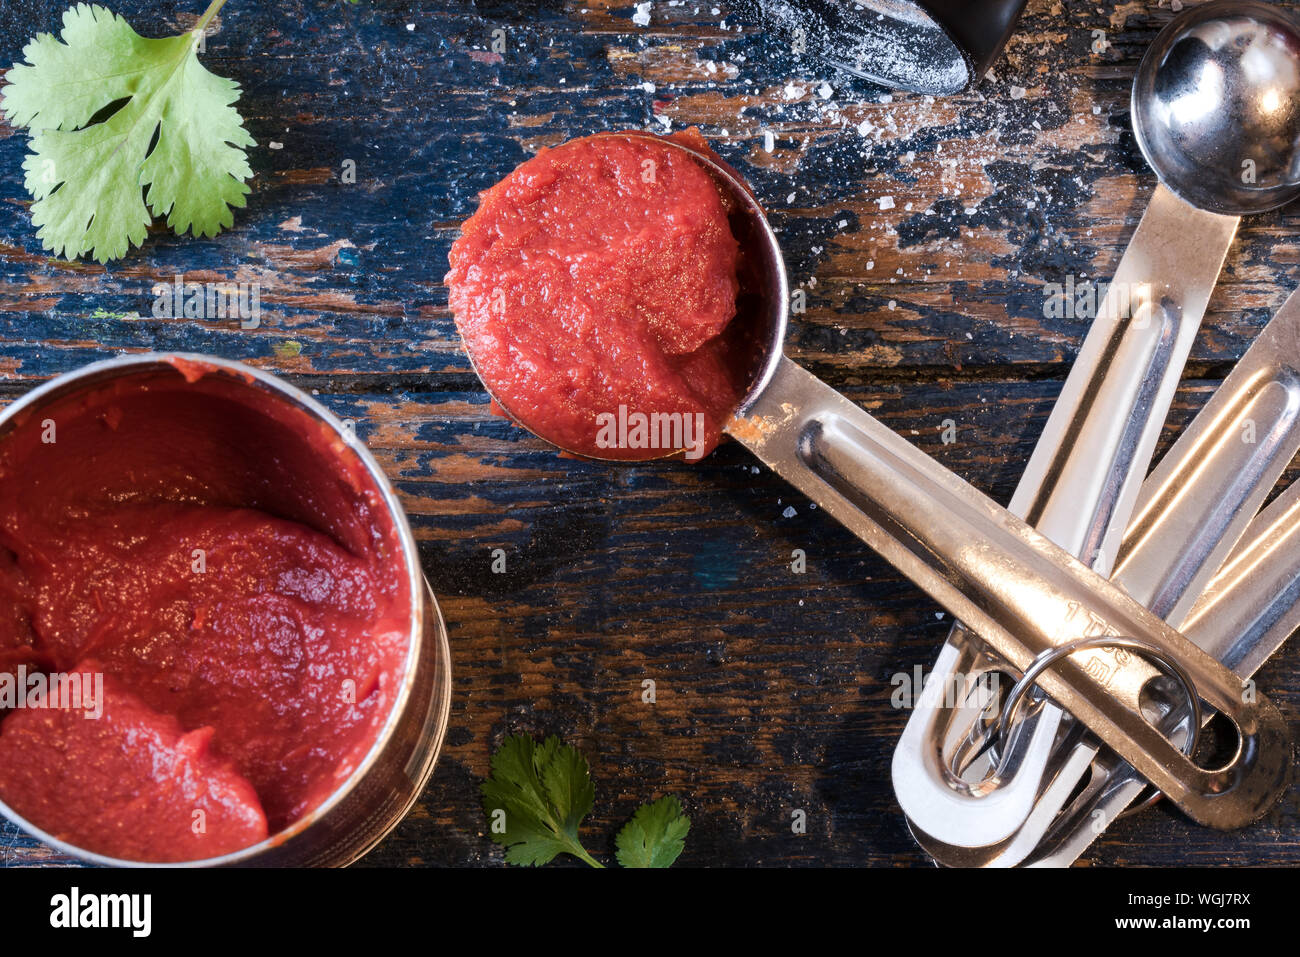 Directly Above Shot Of Tomato Paste In Container And Spoon On Wooden Table Stock Photo